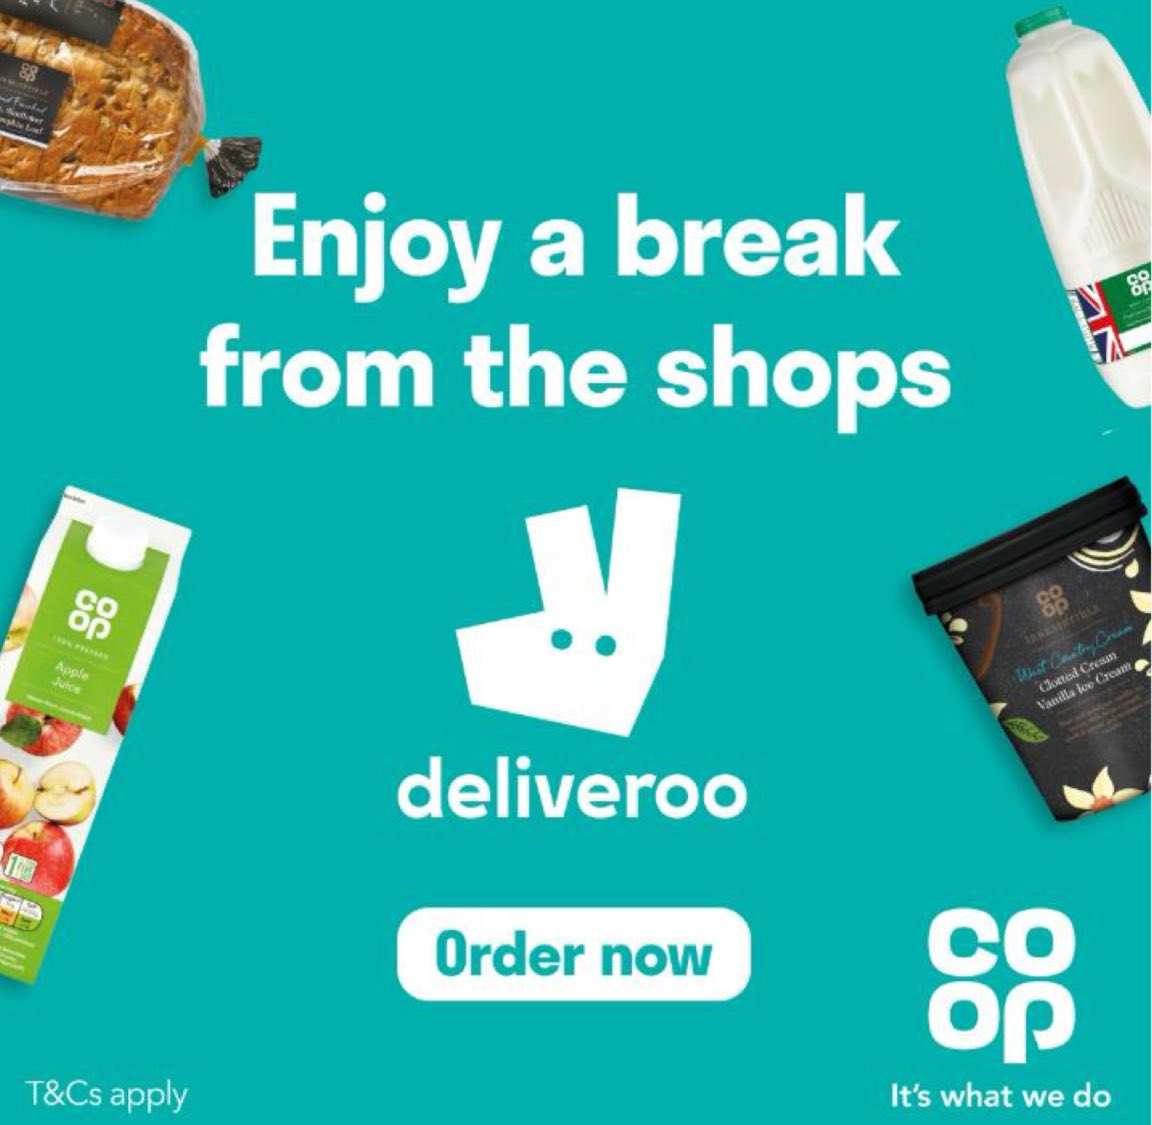 Rainy days call for cozy vibes! You’ll find our New store in Deansbrook, now on @Deliveroo, so forget the hassle and have your @coopuk essentials delivered right to your doorstep. Stay dry, stay comfy!